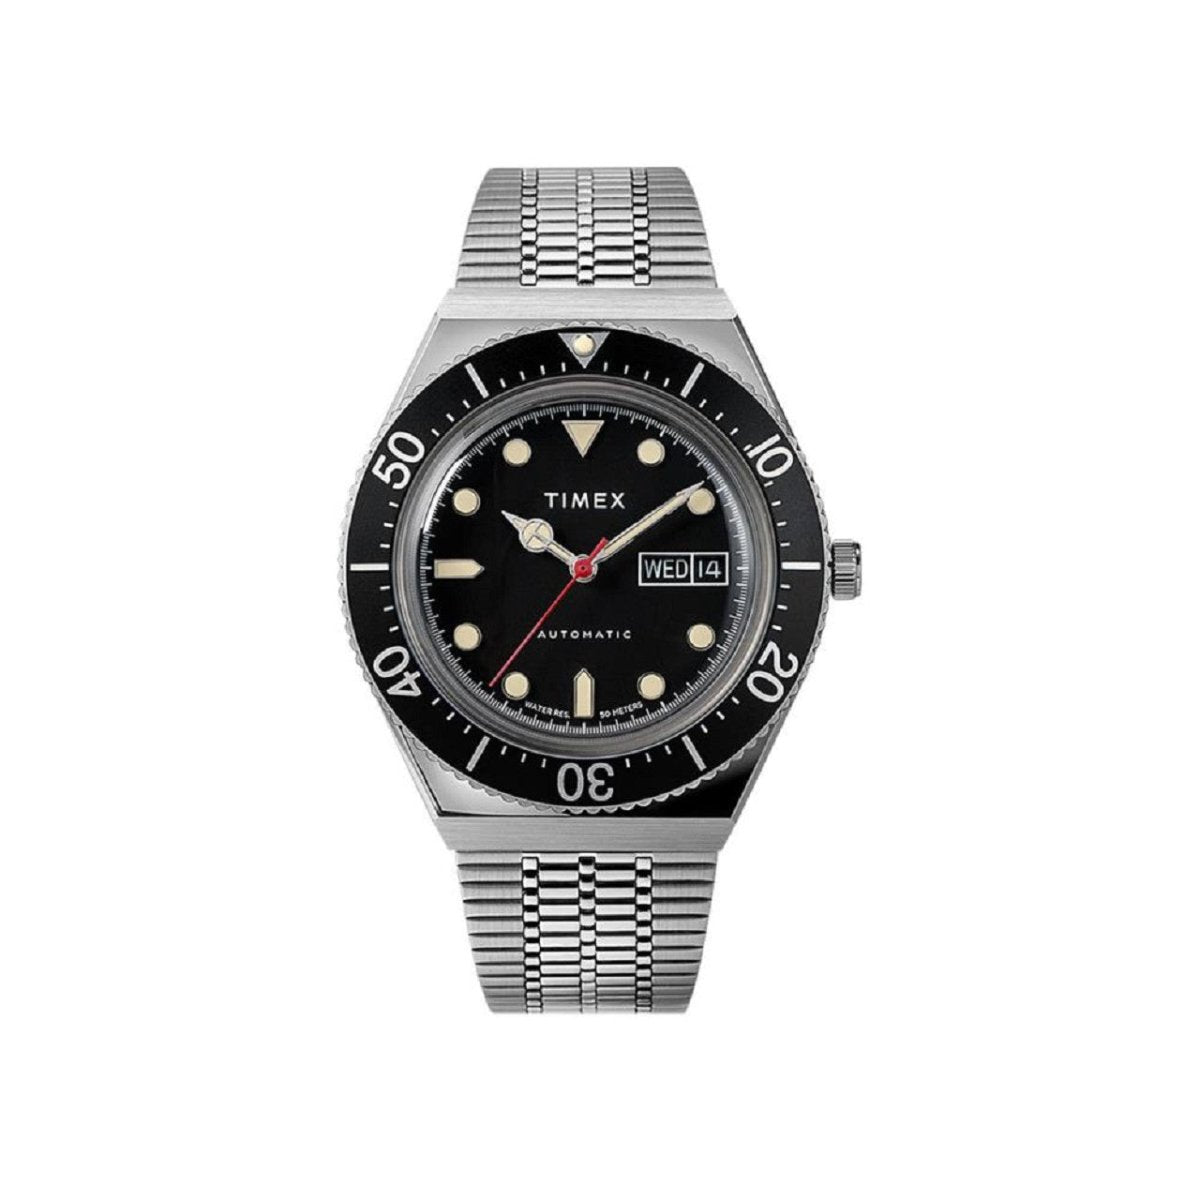 Timex Archive M79 Automatic Diver 40mm (Stahl / Schwarz)  - Allike Store